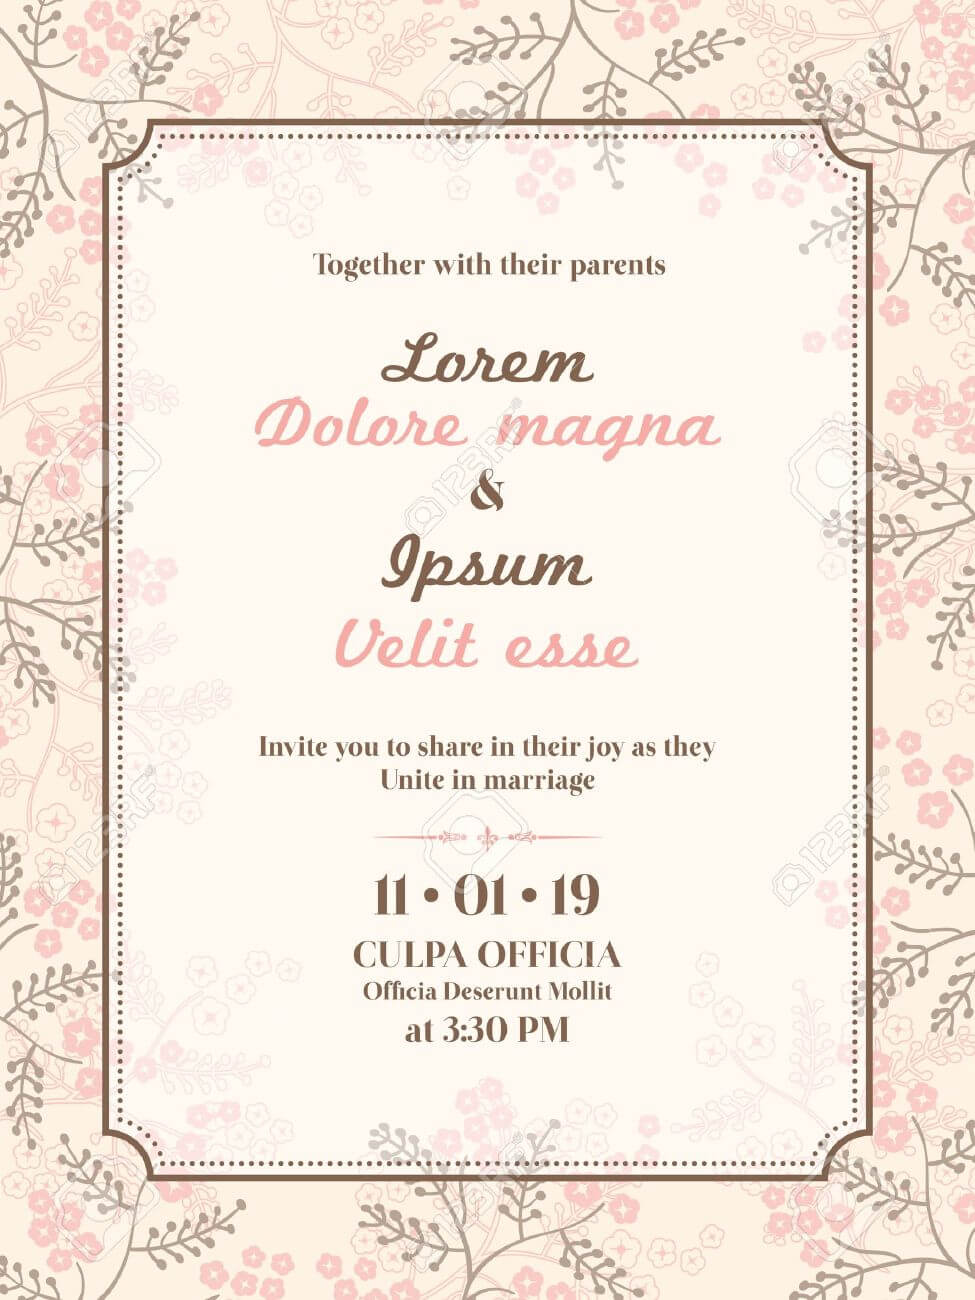 Wedding Invitation Card Template In Invitation Cards Templates For Marriage